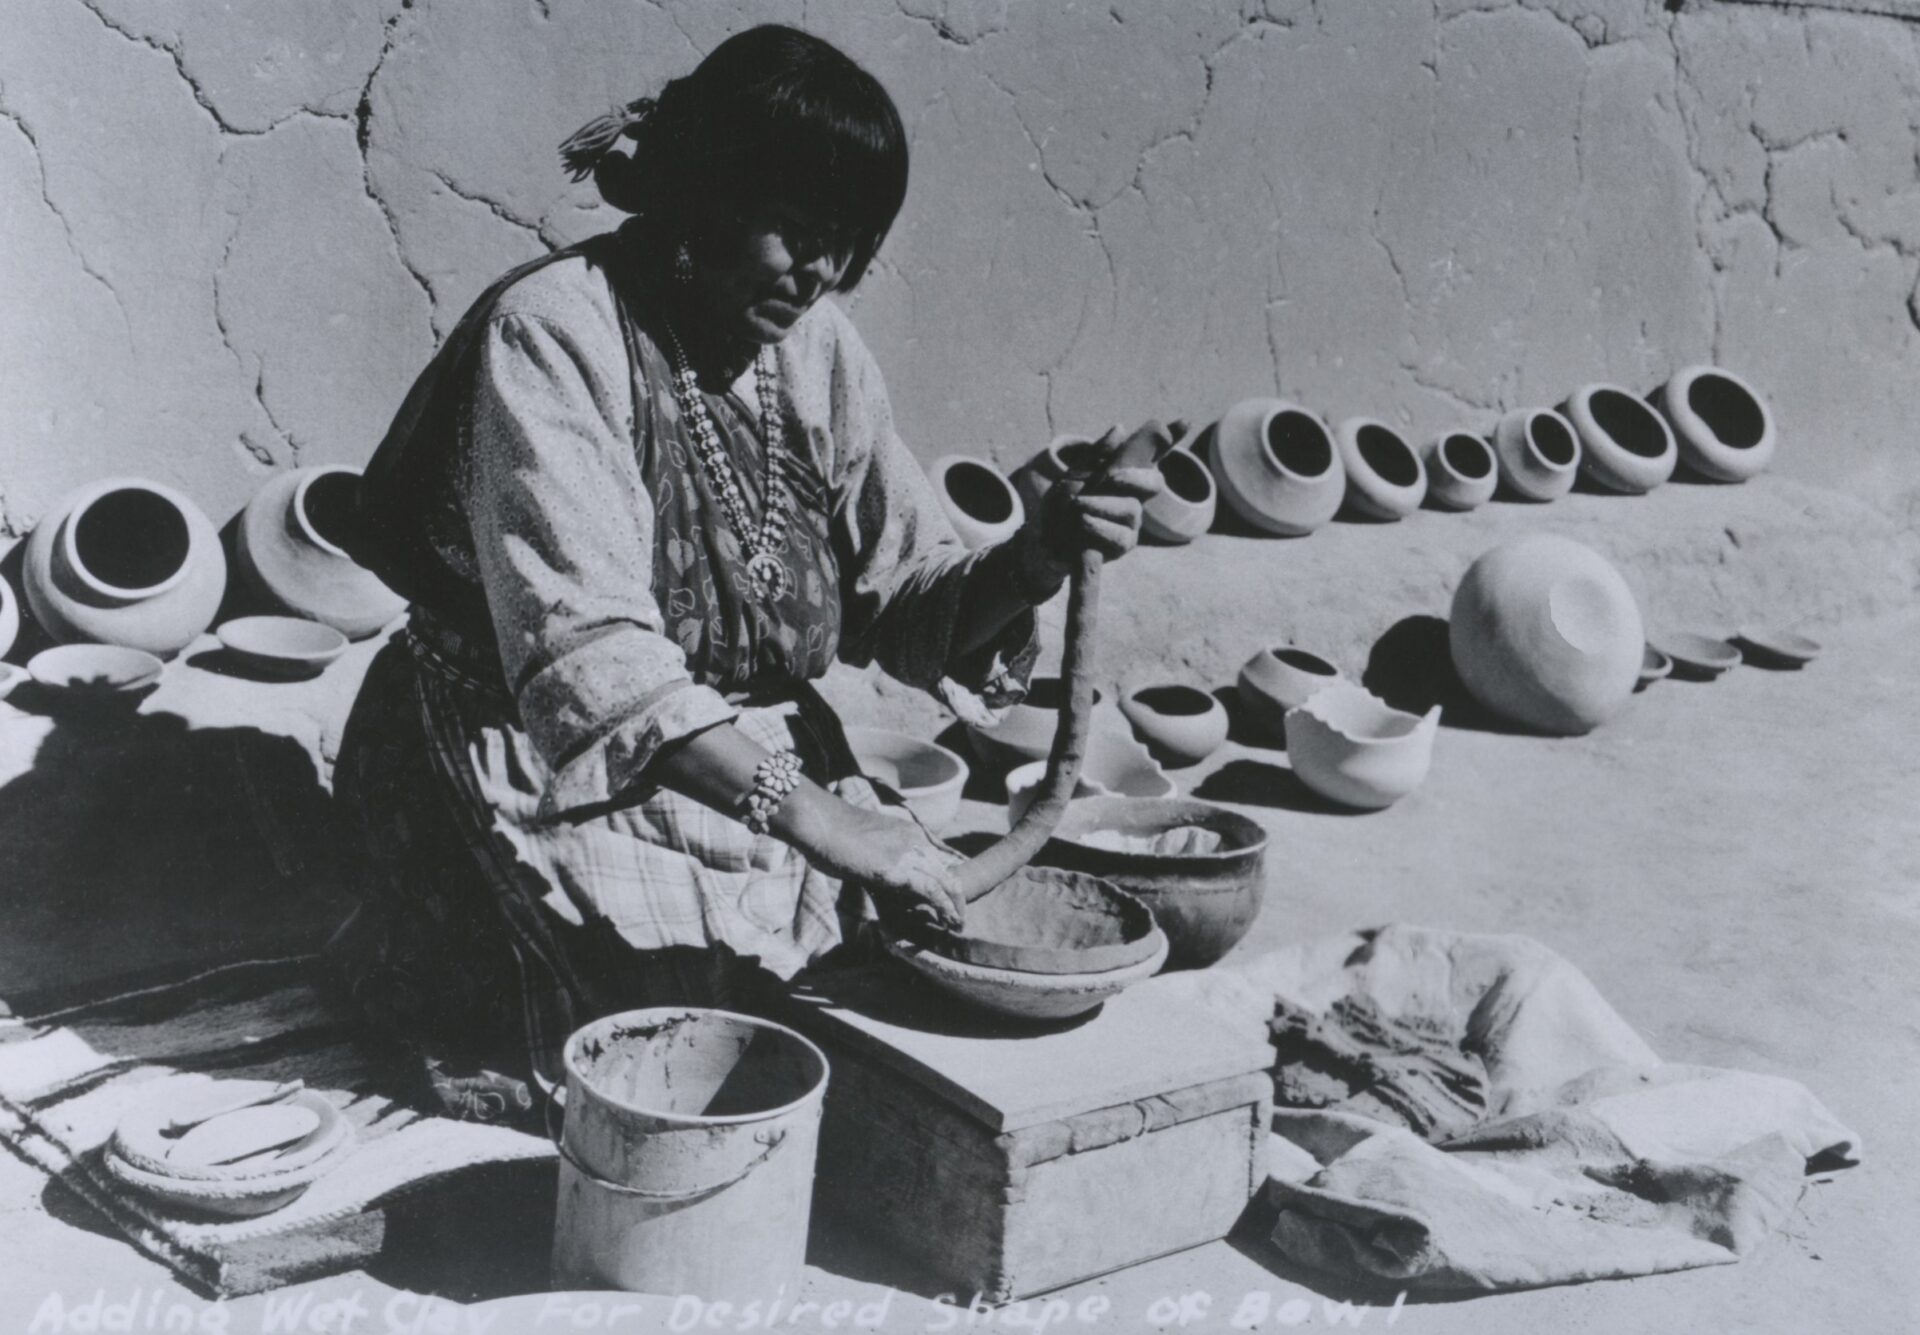 A woman shaping wet clay into a bowl with other pottery pieces lined up in the background.